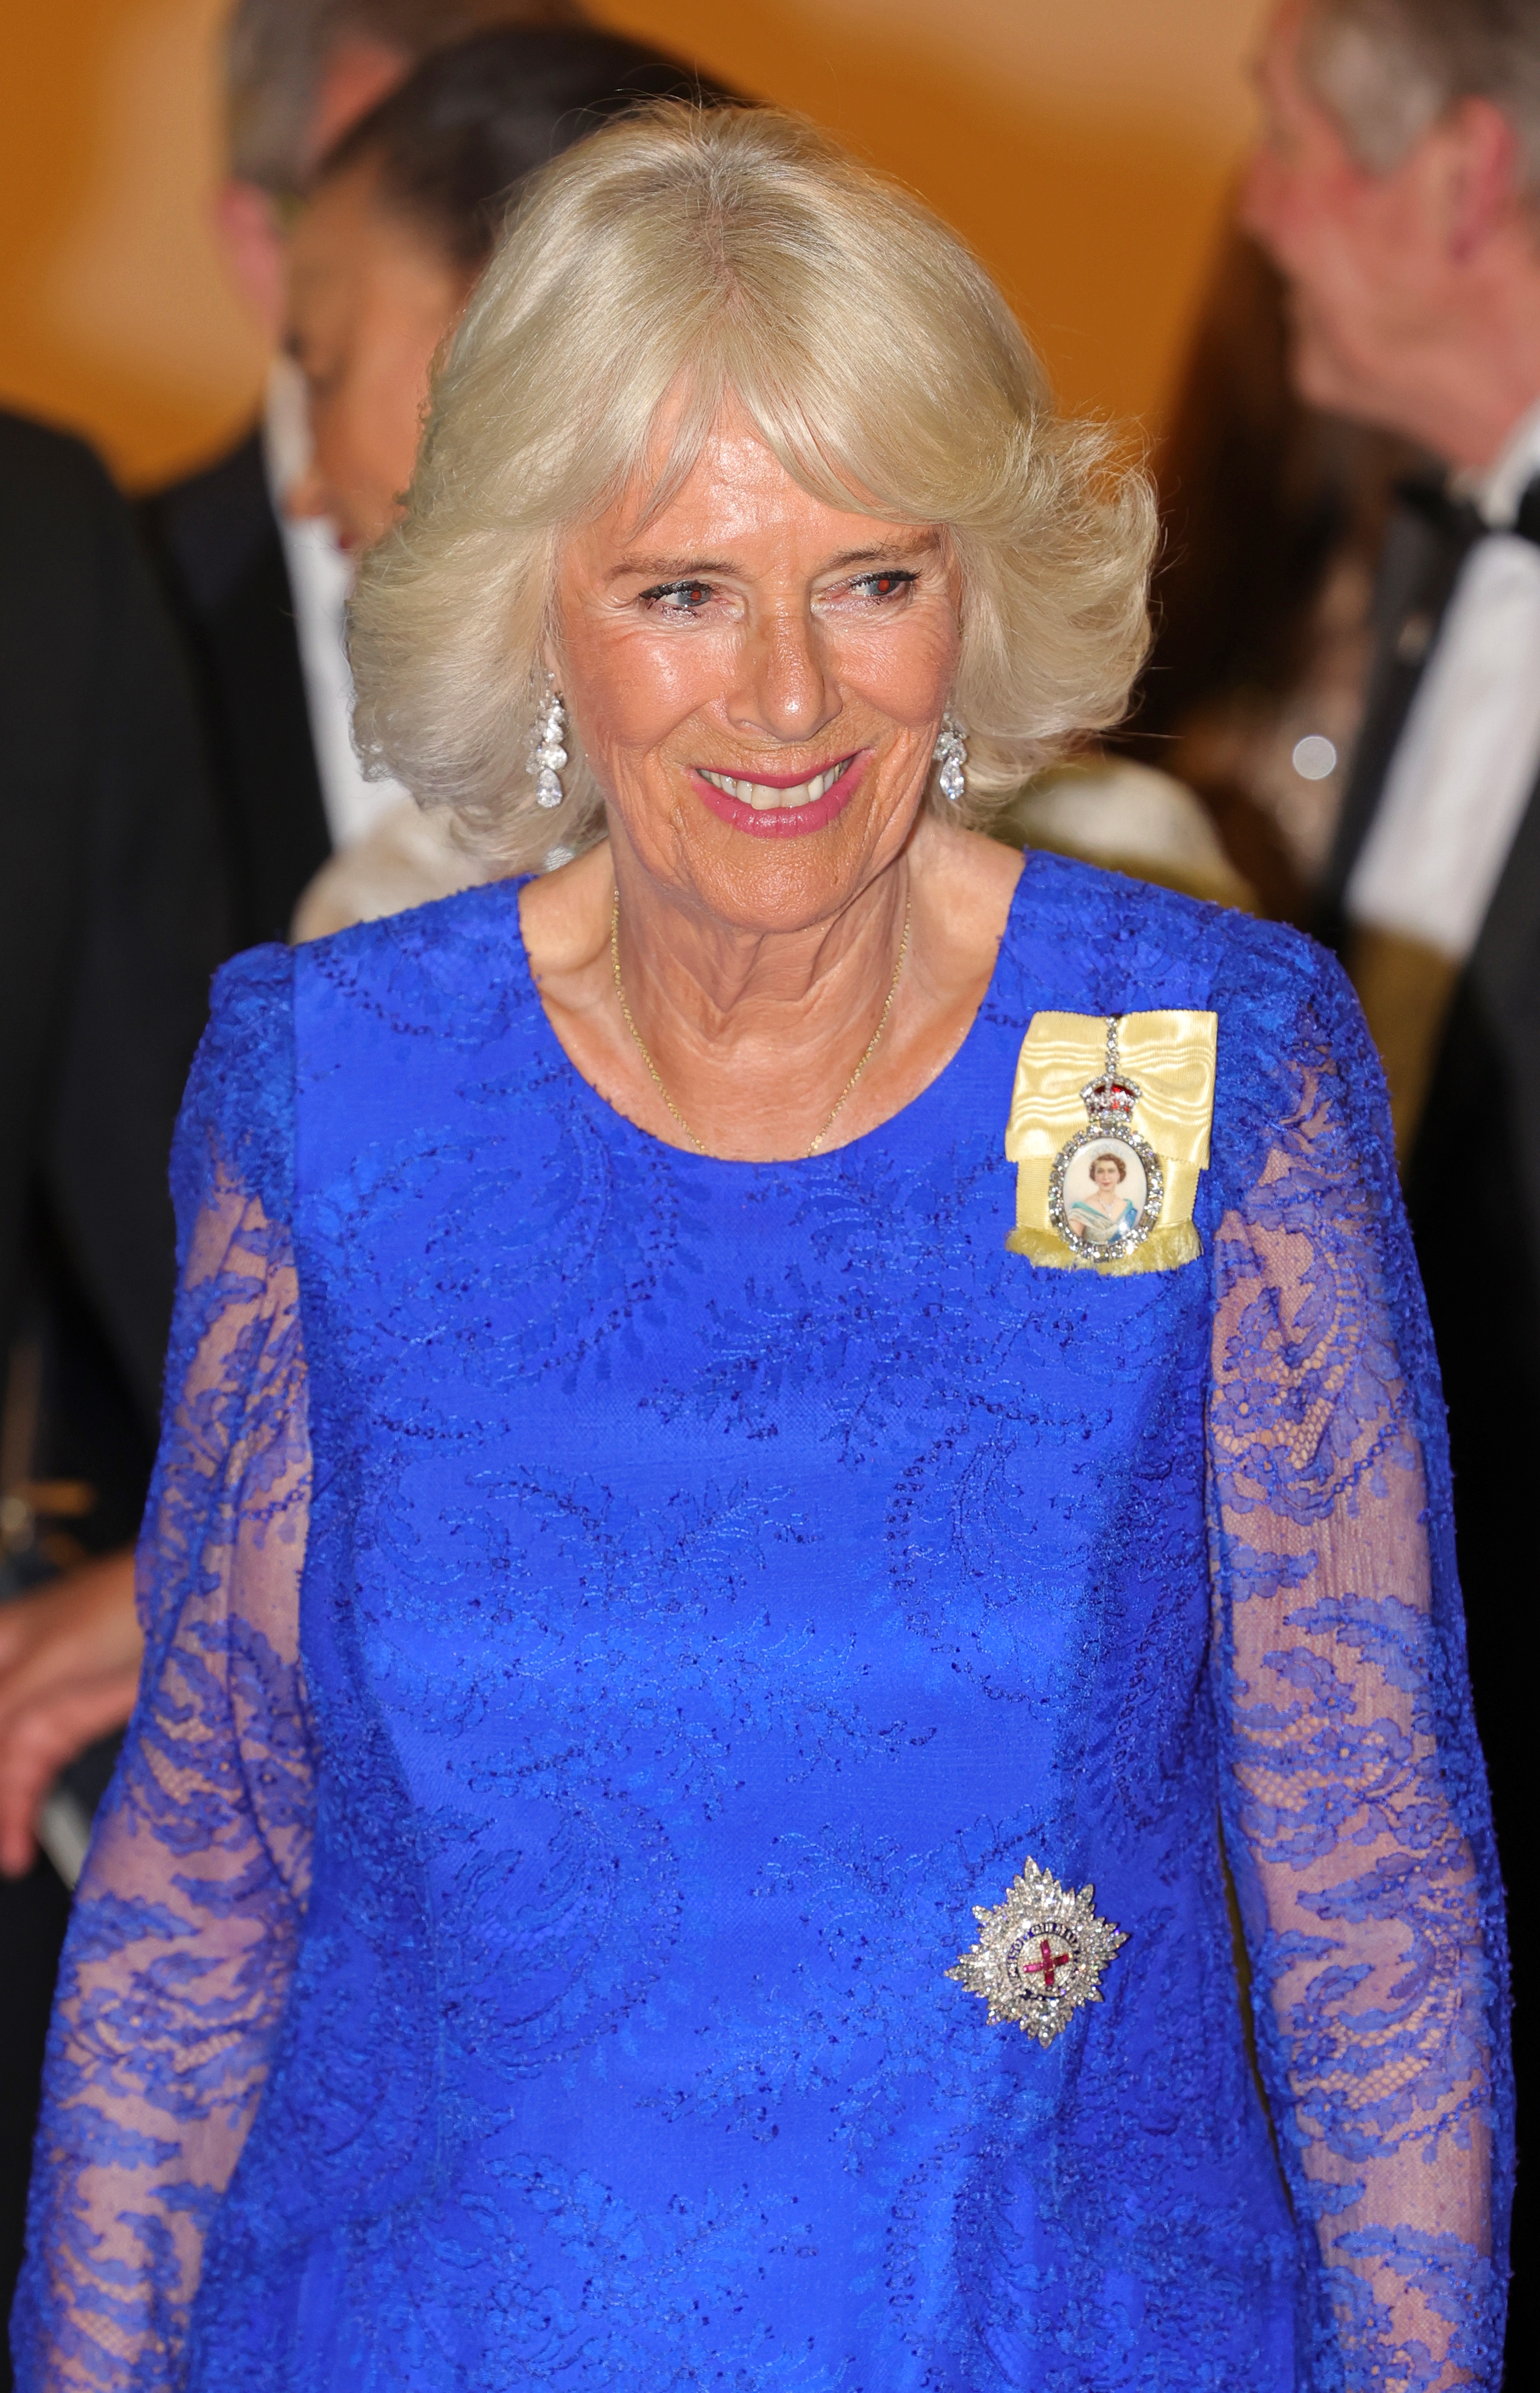 Queen Camilla attends a dinner event at the Marriott Hotel on June 24, 2022 in Kigali, Rwanda | Source: Getty Images